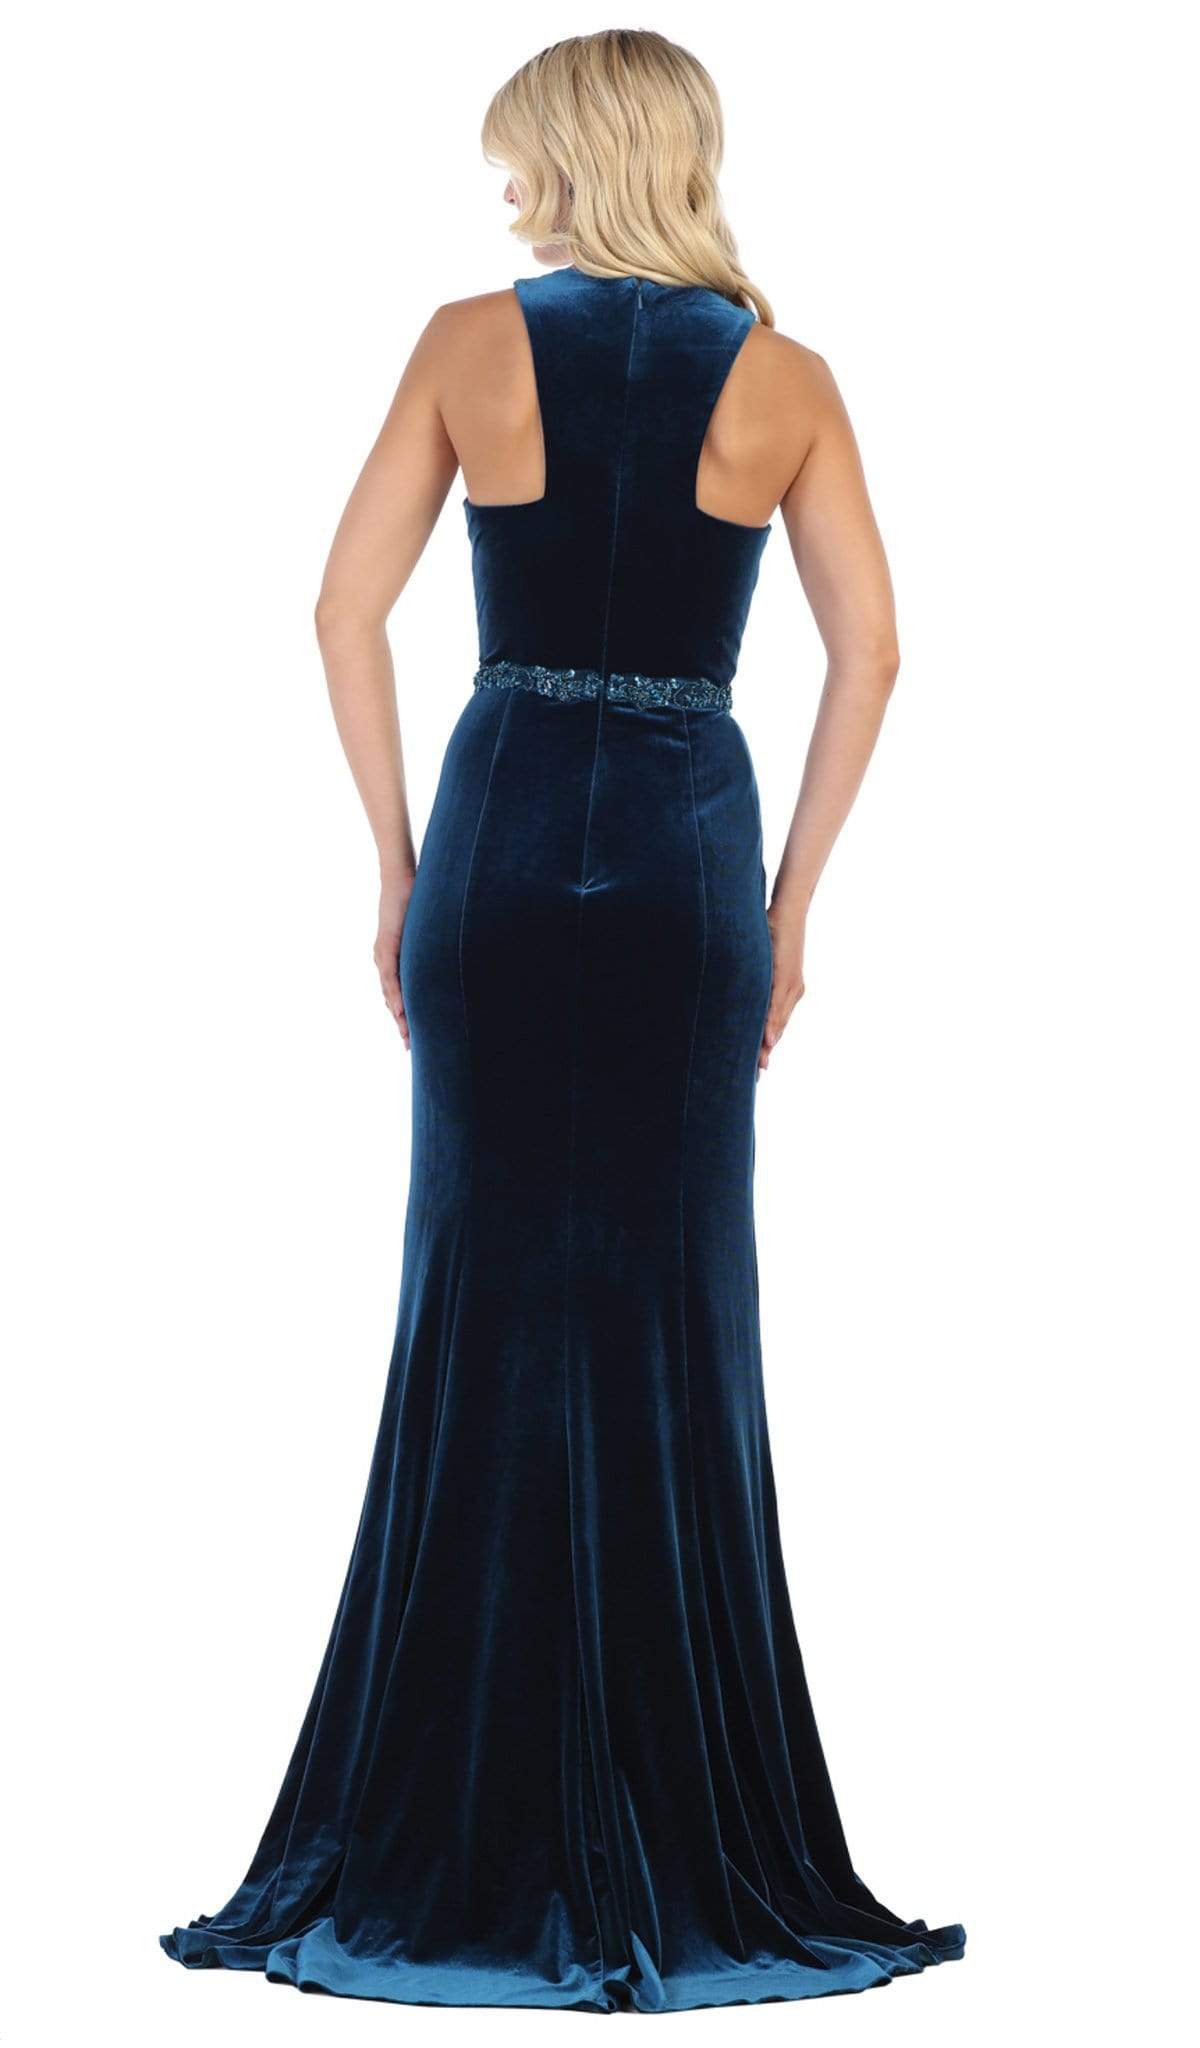 May Queen - RQ7652 Fitted Jewel Sheath Evening Dress Special Occasion Dress